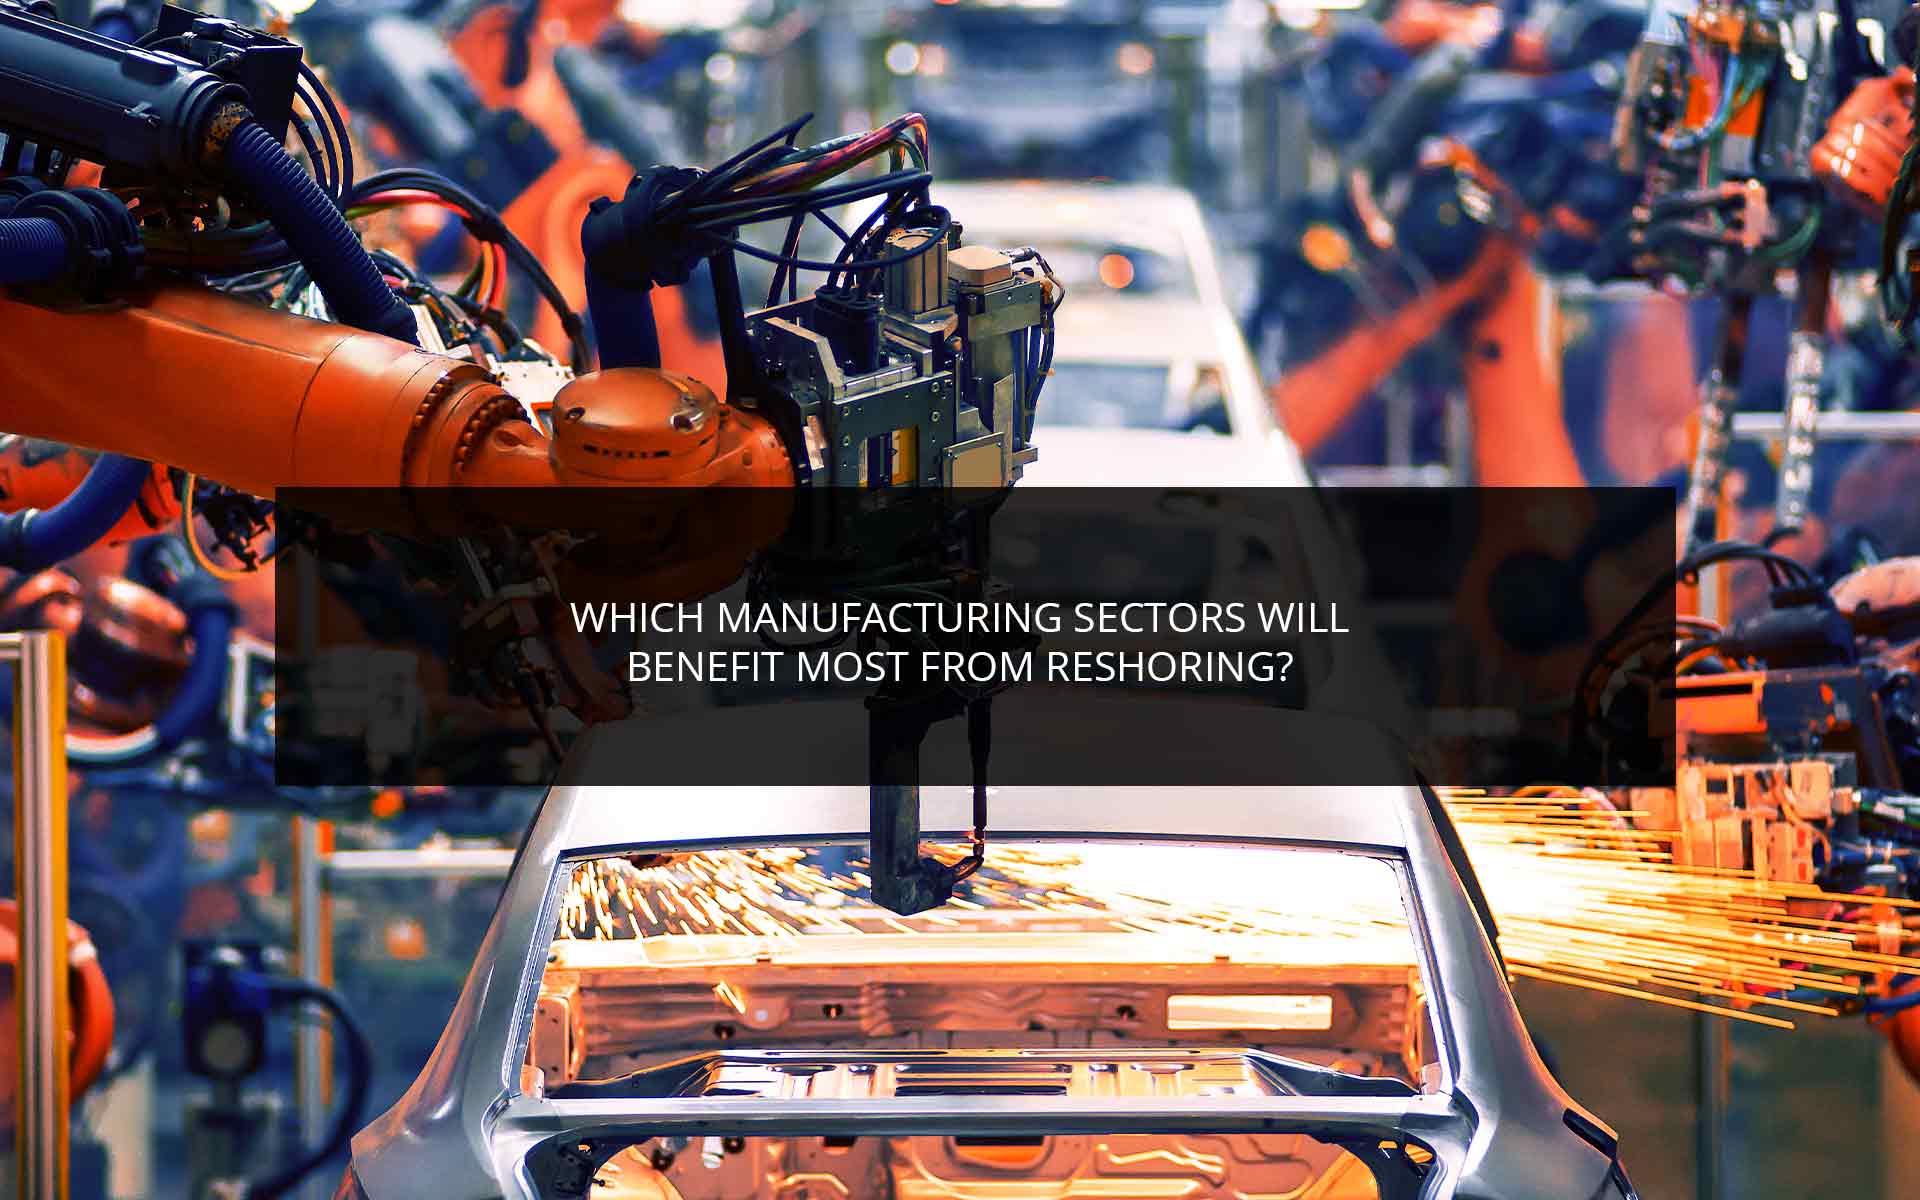 Which Manufacturing Sectors Will Benefit Most From Reshoring?